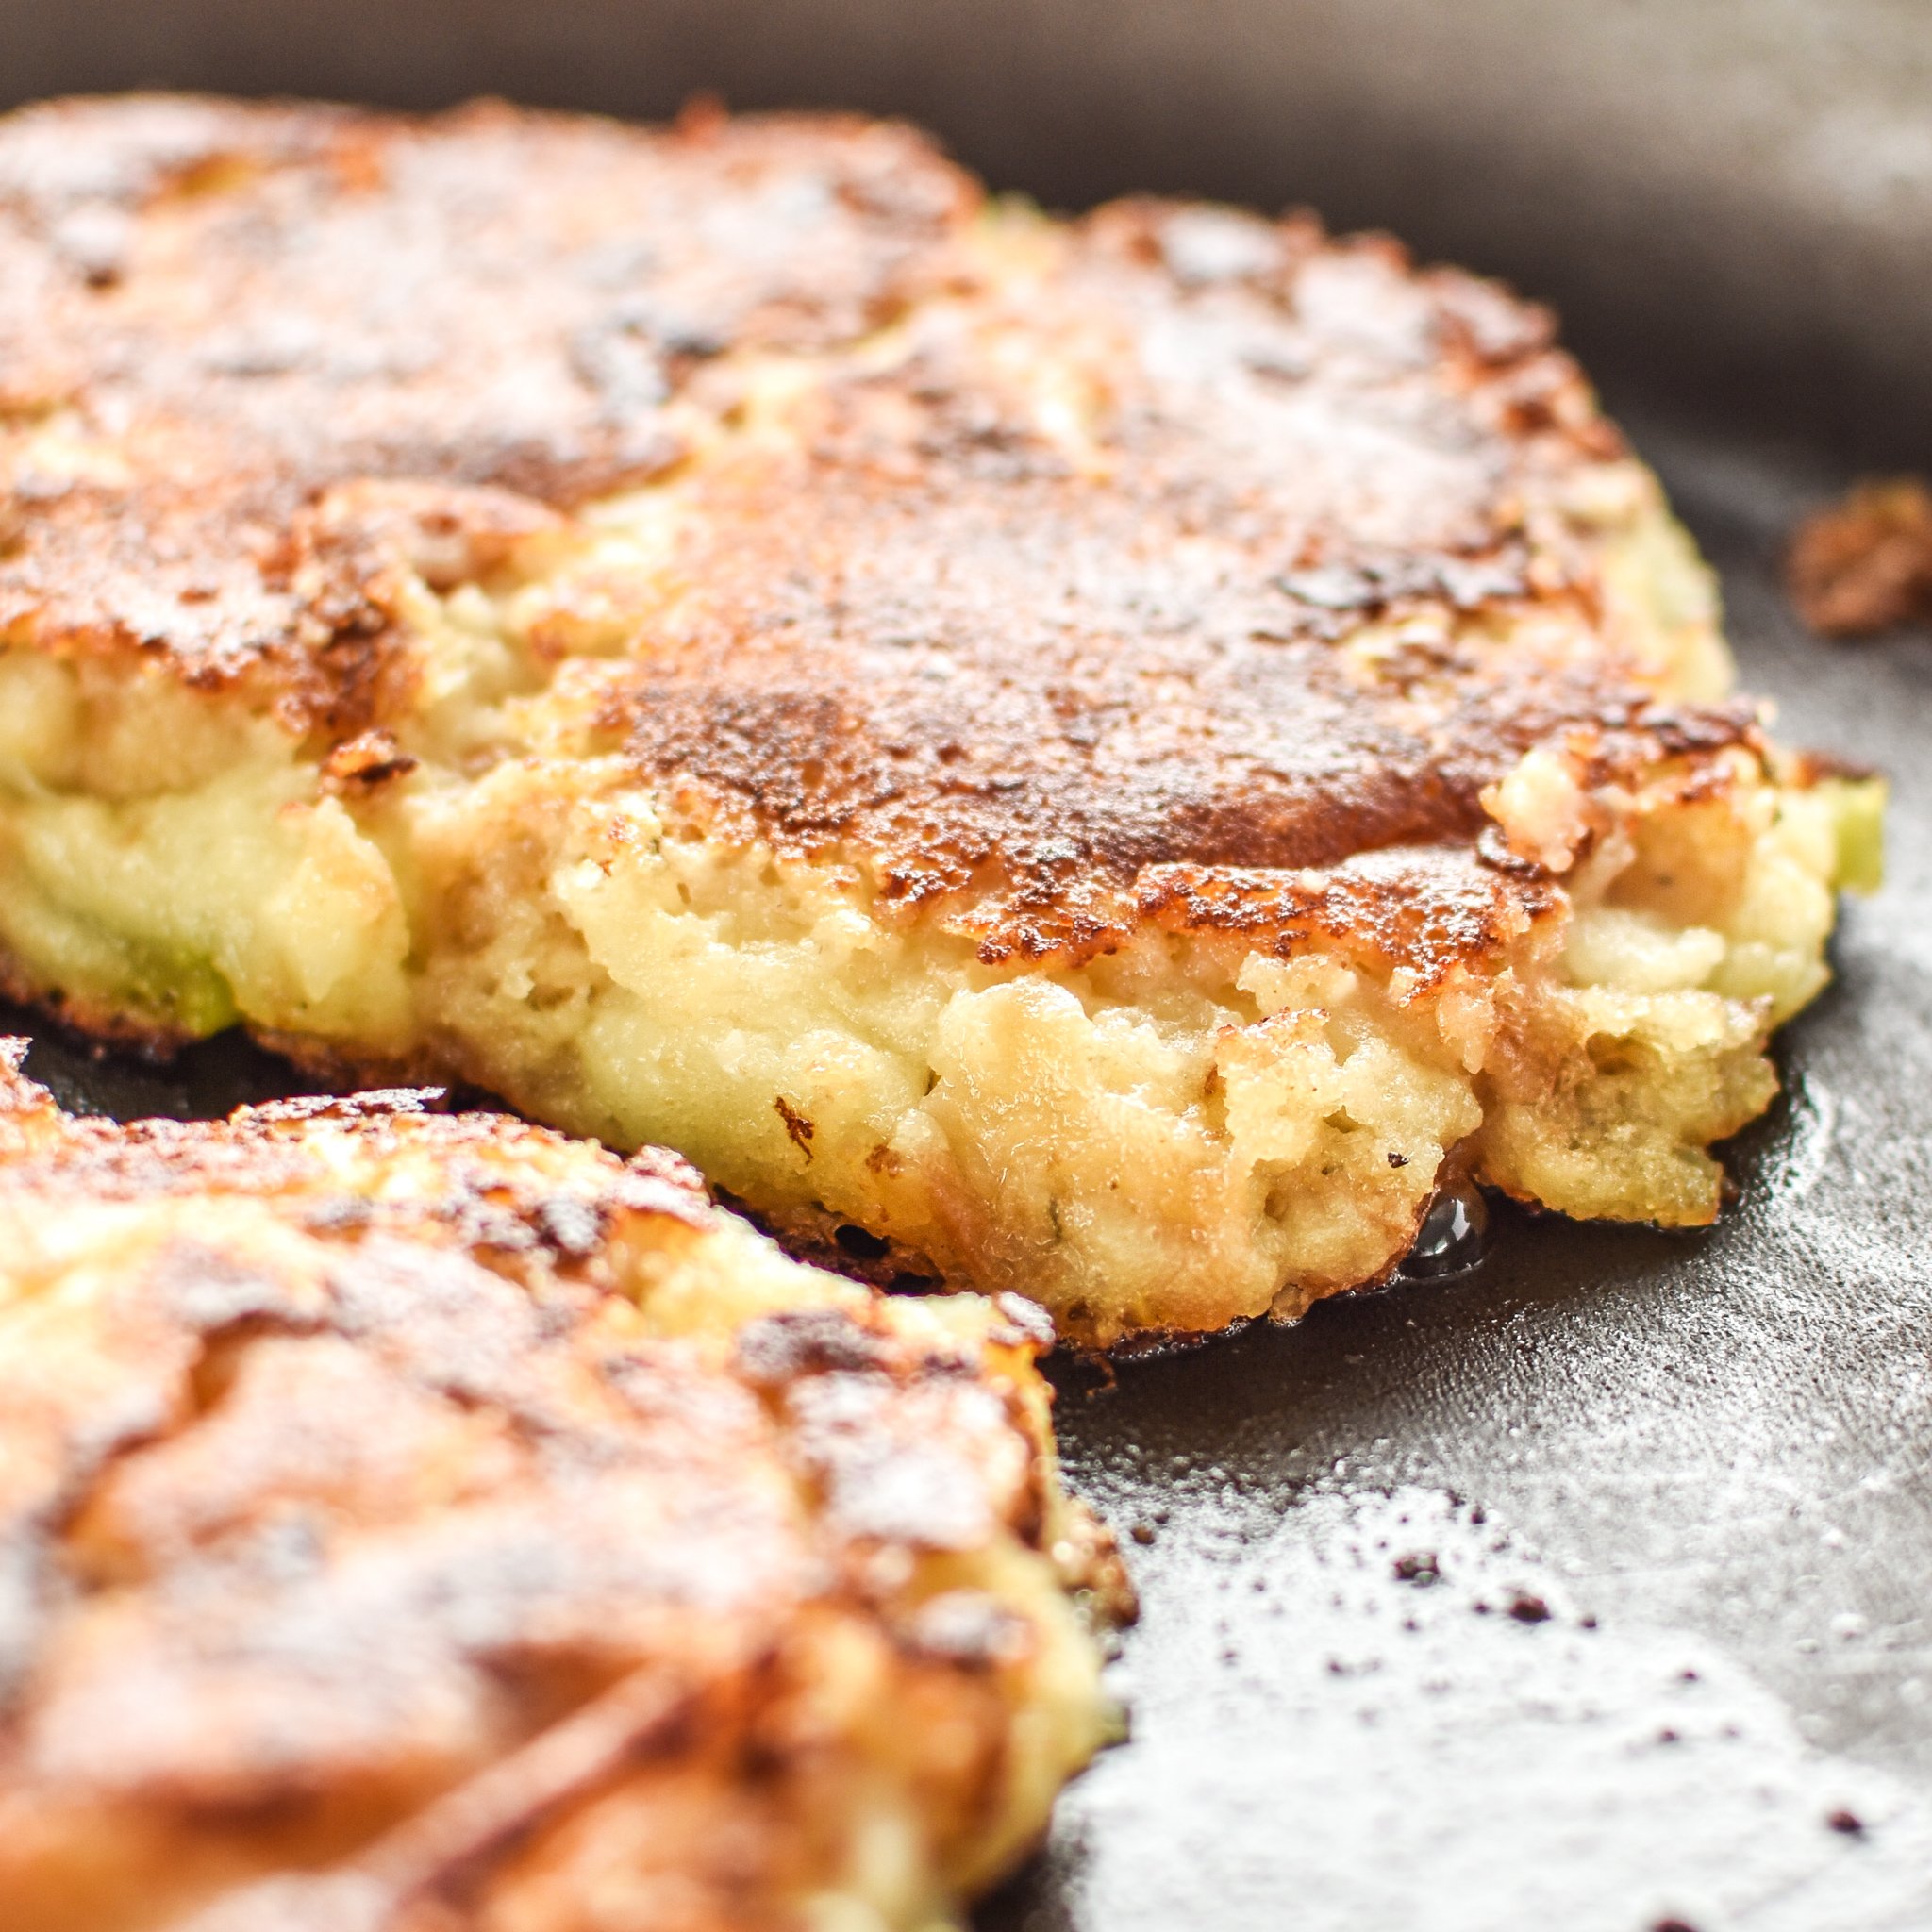 Mashed potato and stuffing pancakes in the frying pan